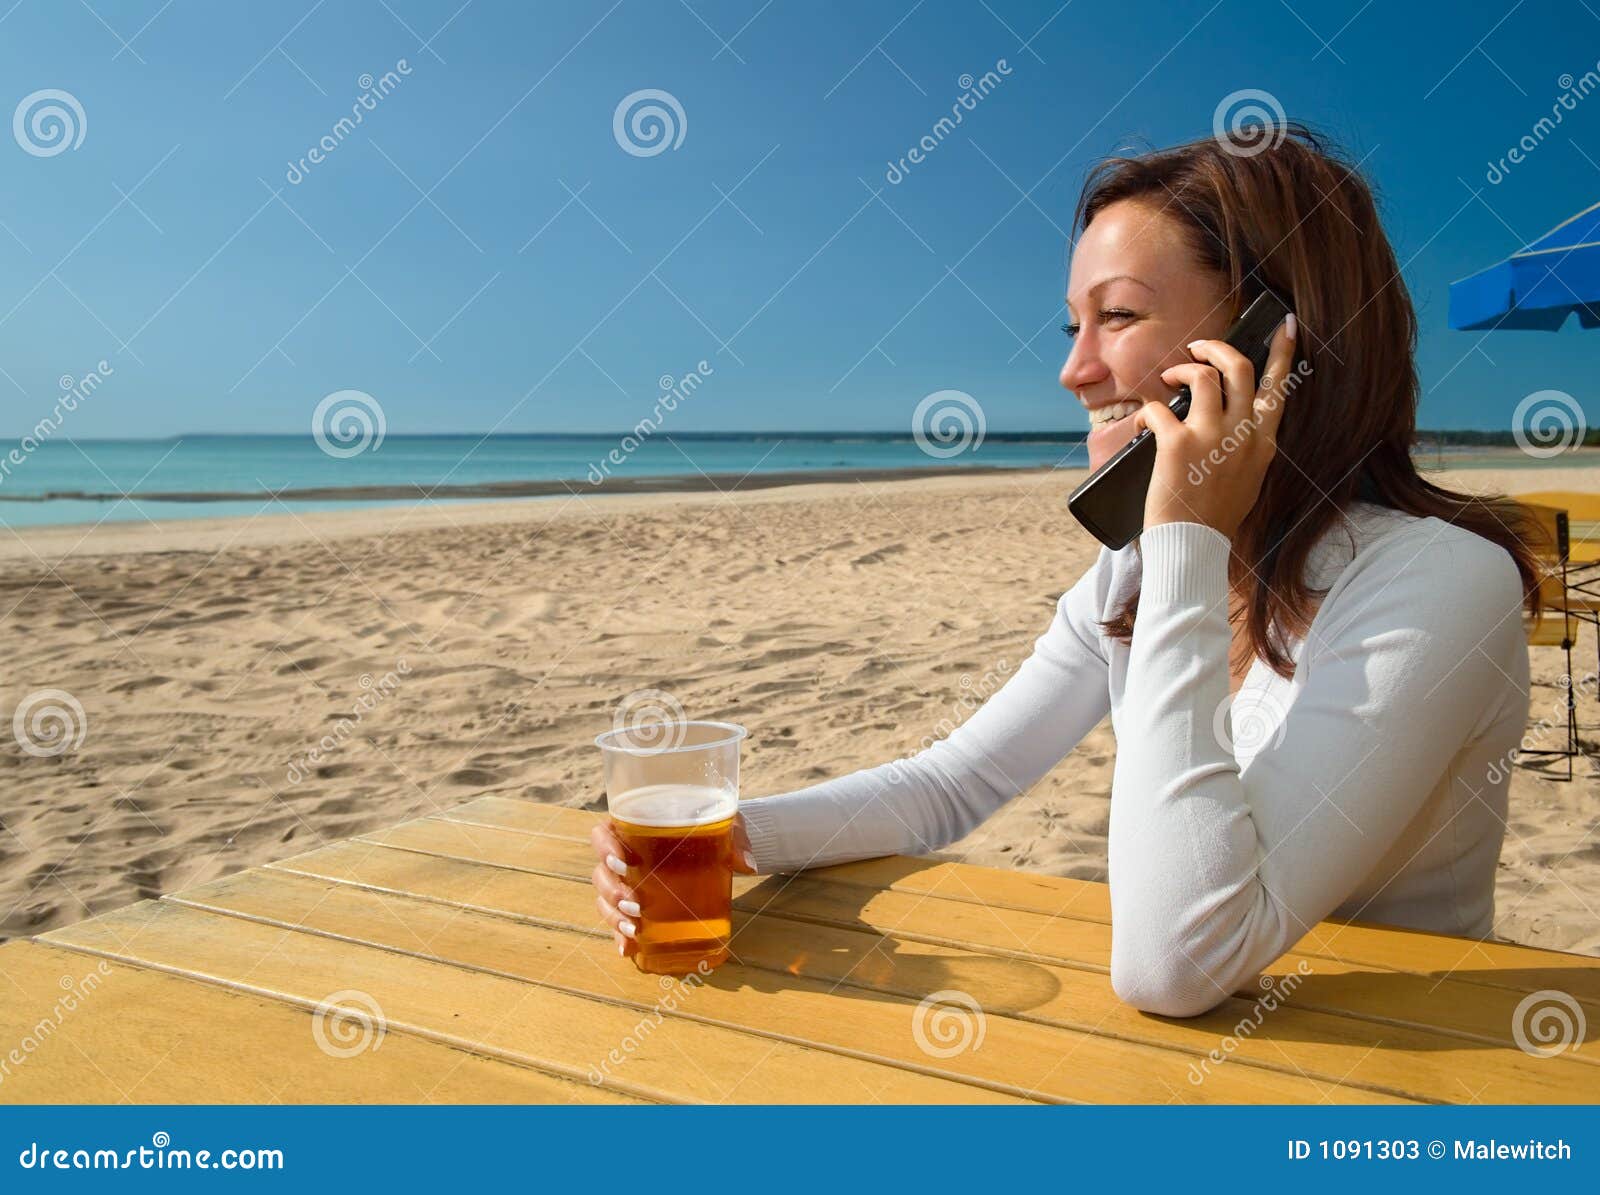 Girl Sitting&talking by Phone on a Beach Stock Image - Image of drink ...